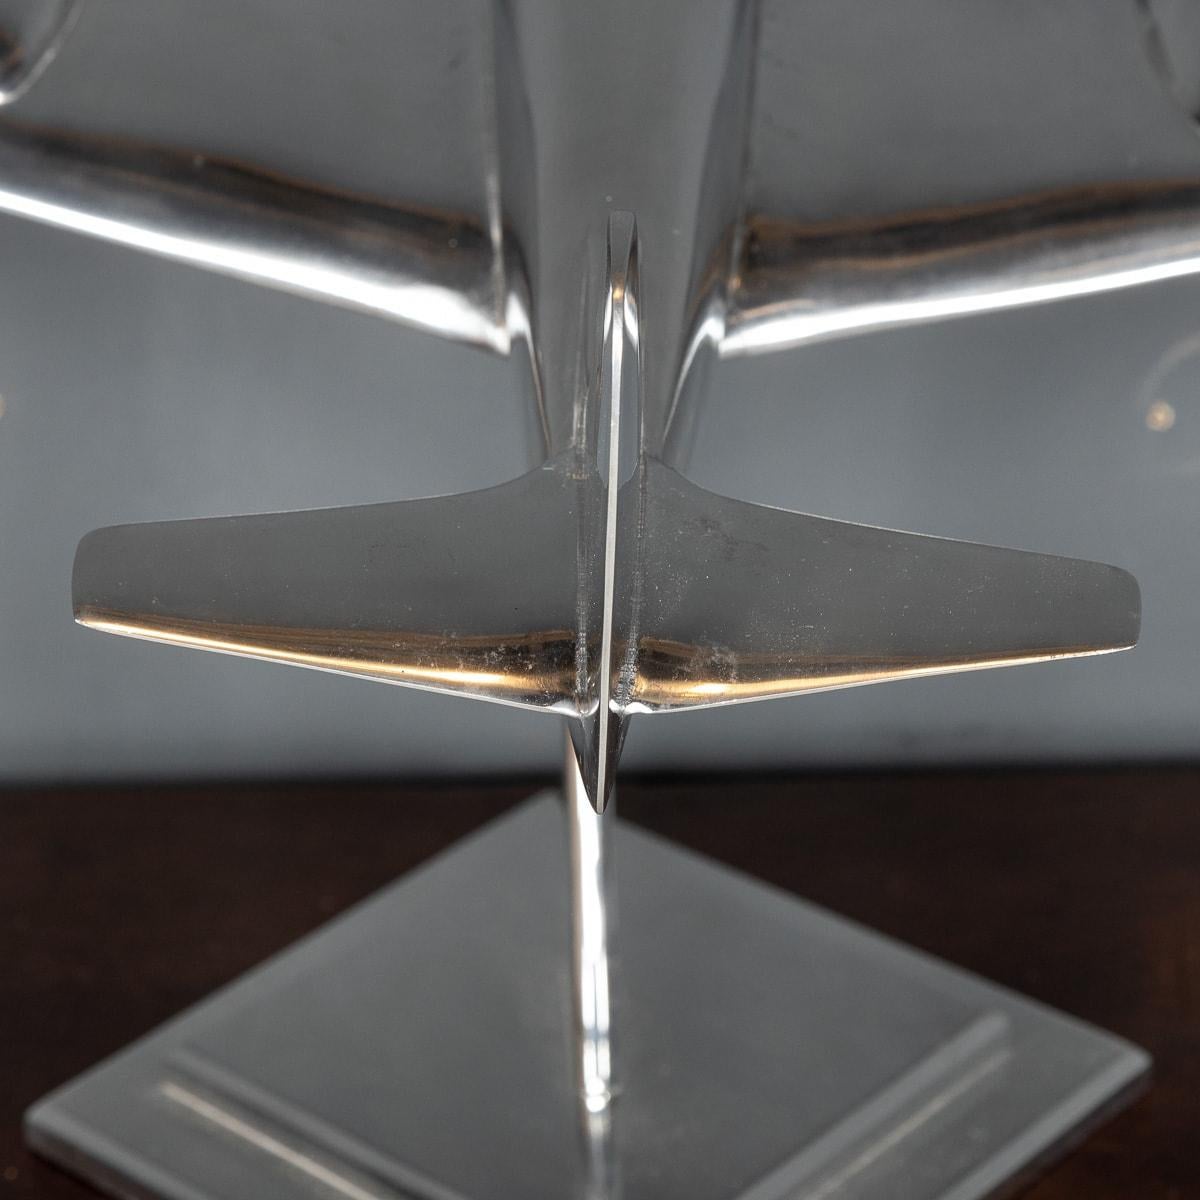 20th Century Polished Aluminium Model Of A Bomber Airplane, c.1950 For Sale 4